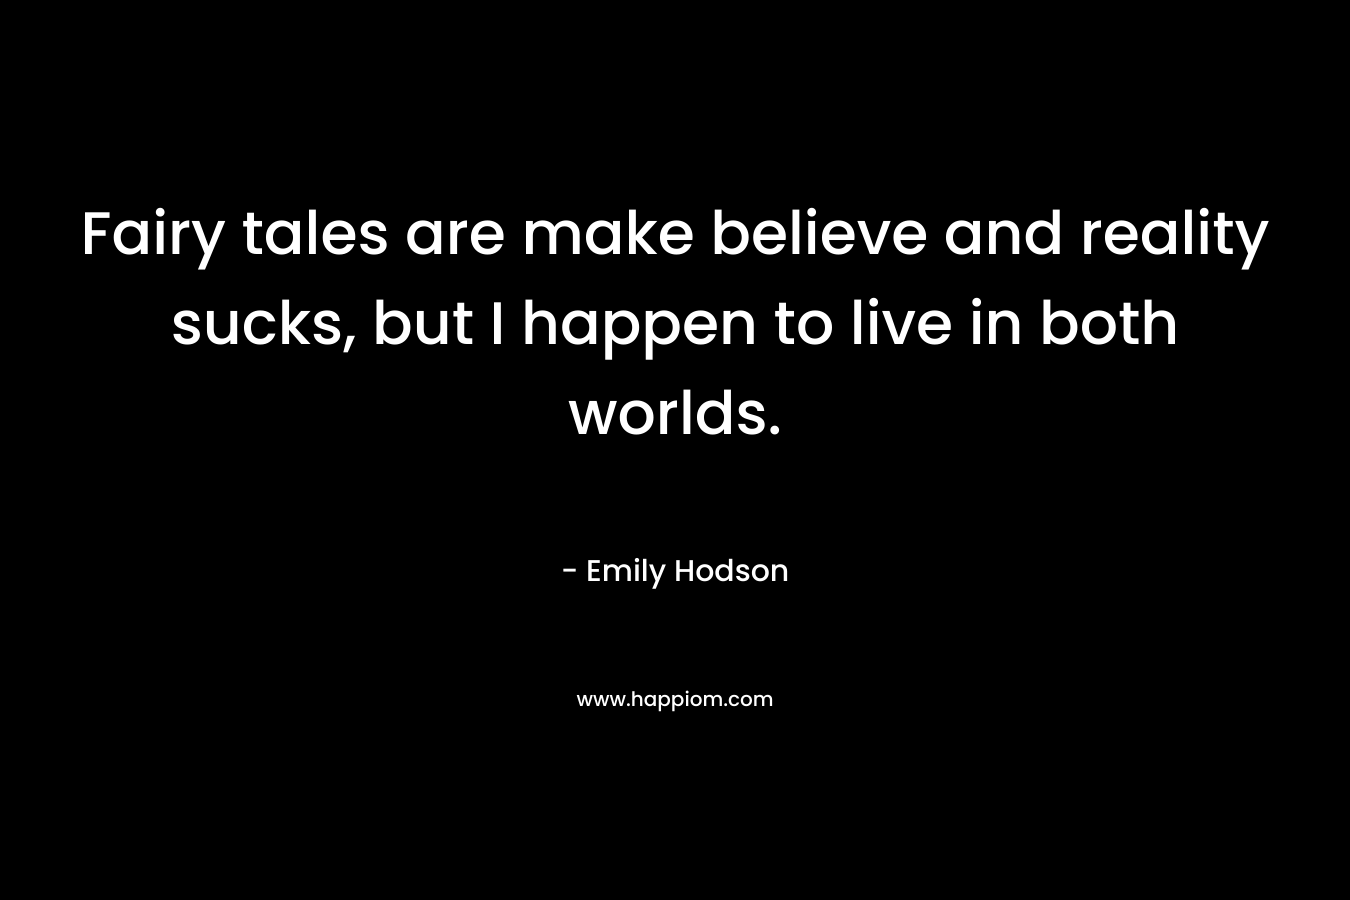 Fairy tales are make believe and reality sucks, but I happen to live in both worlds. – Emily Hodson